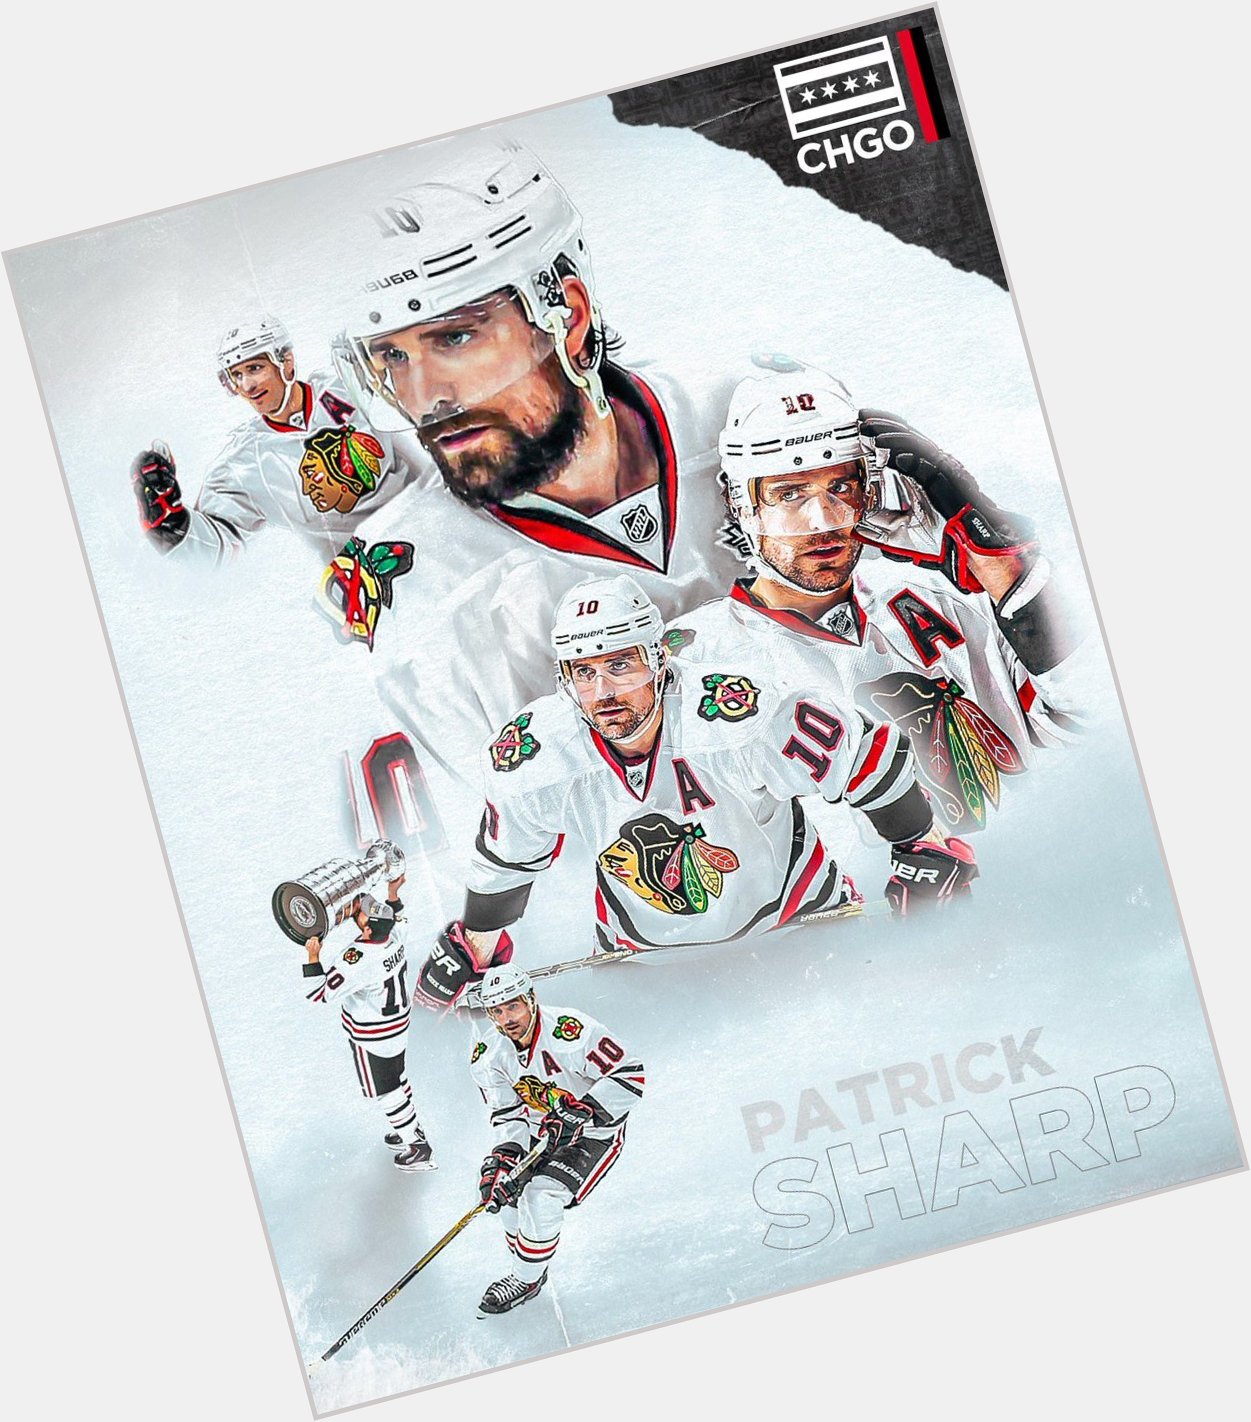 Happy 41st Birthday to 3-time Stanley Cup Champion Patrick Sharp!  